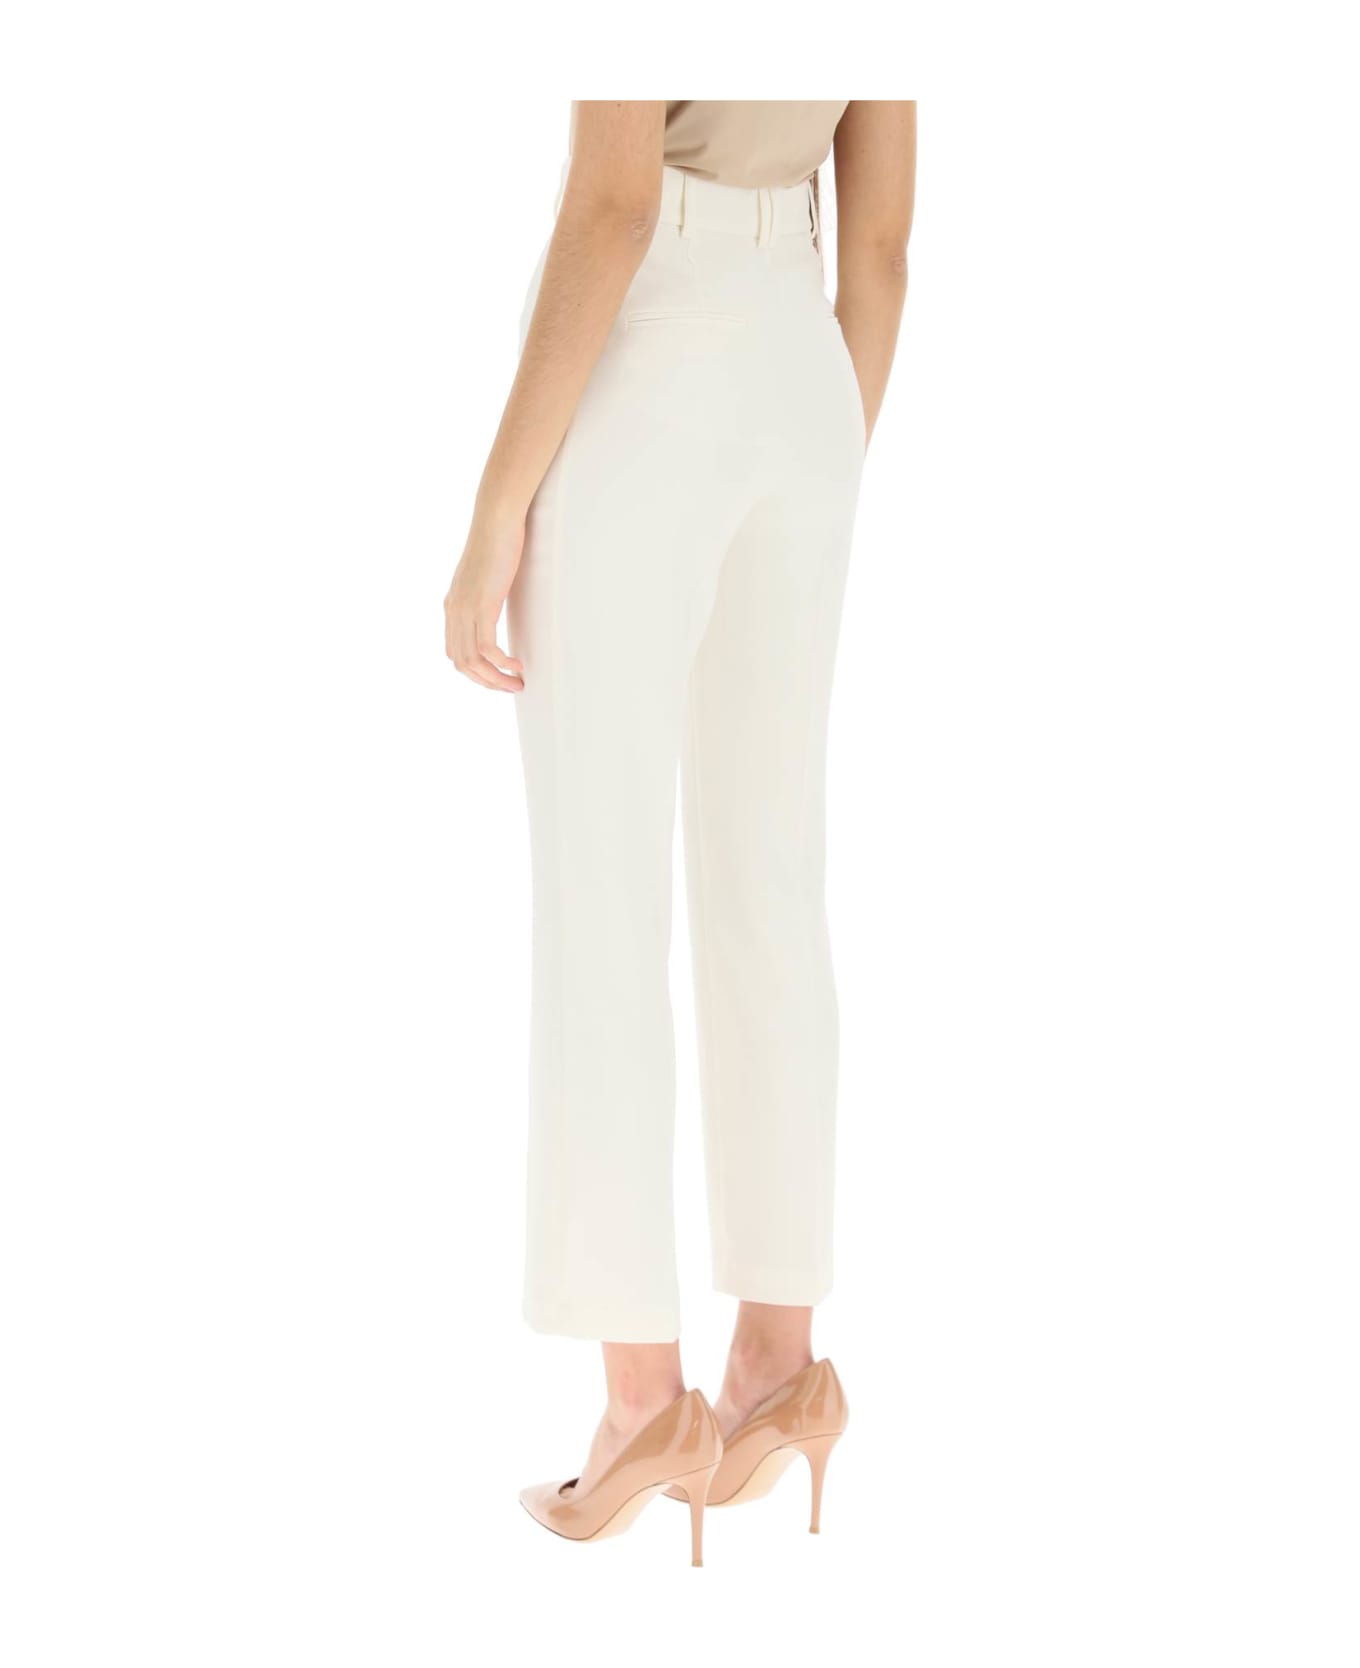 Hebe Studio 'loulou' Cady Trousers - CREAM (White)